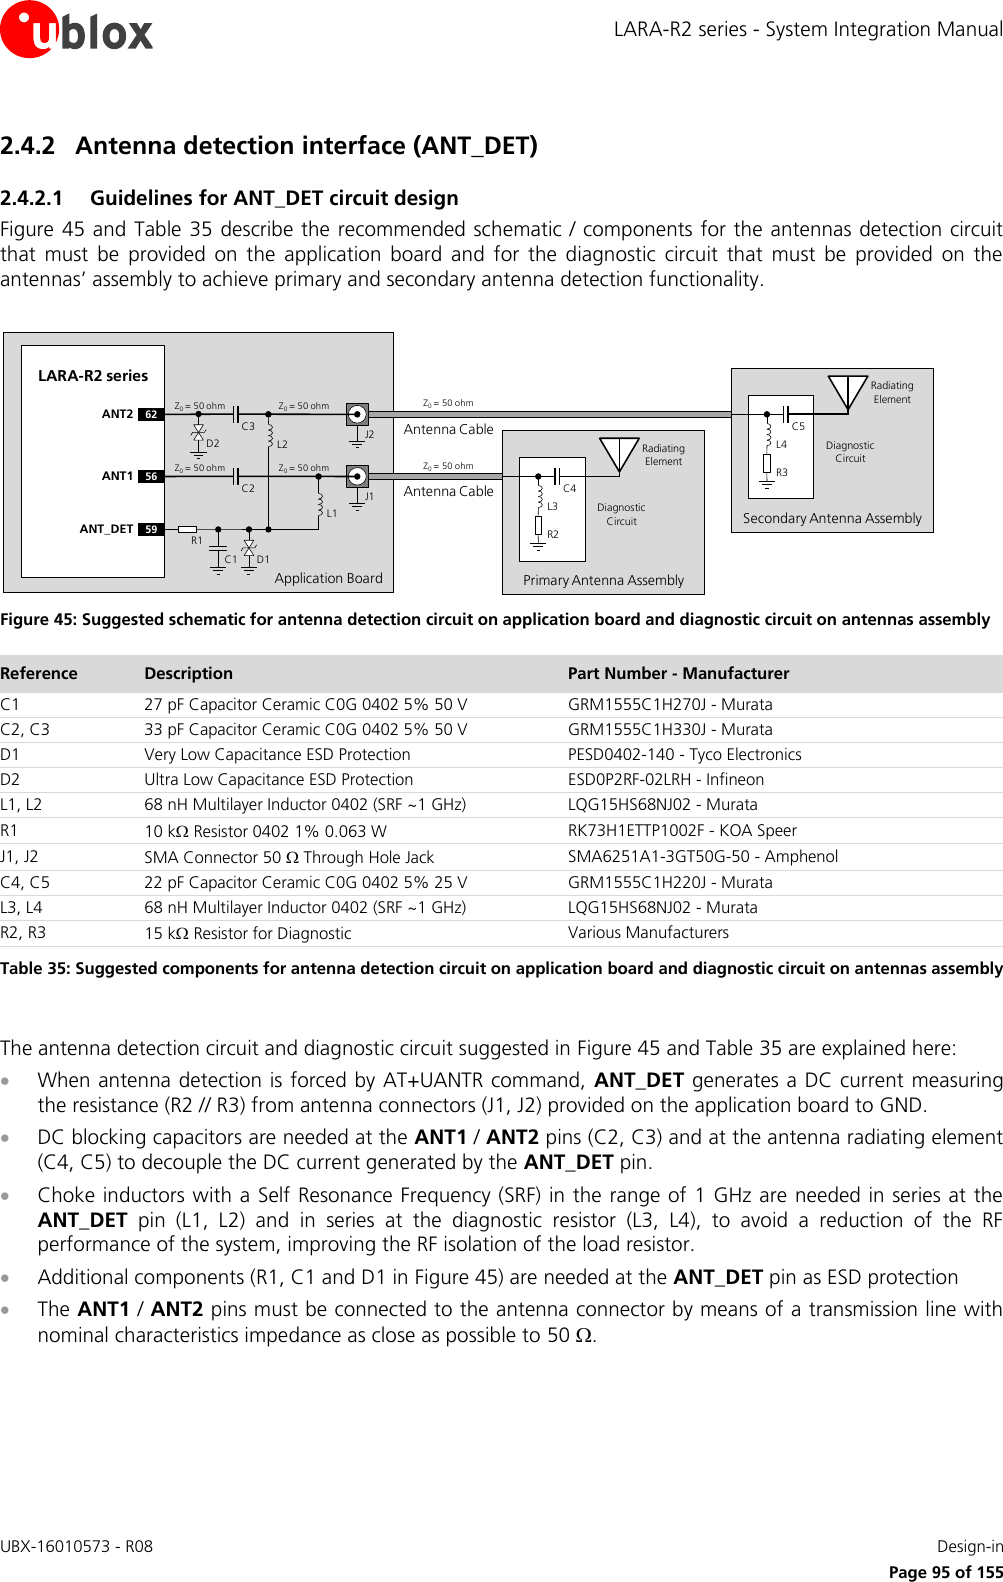 LARA-R2 series - System Integration Manual UBX-16010573 - R08    Design-in     Page 95 of 155 2.4.2 Antenna detection interface (ANT_DET) 2.4.2.1 Guidelines for ANT_DET circuit design Figure 45 and Table 35  describe the recommended schematic / components for the antennas detection circuit that  must  be  provided  on  the  application  board  and  for  the  diagnostic  circuit  that  must  be  provided  on  the antennas’ assembly to achieve primary and secondary antenna detection functionality.  Application BoardAntenna CableLARA-R2 series56ANT159ANT_DET R1C1 D1C2 J1Z0= 50 ohm Z0= 50 ohm Z0= 50 ohmPrimary Antenna AssemblyR2C4L3Radiating ElementDiagnostic CircuitL2L1Antenna Cable62ANT2C3 J2Z0= 50 ohm Z0= 50 ohm Z0= 50 ohmSecondary Antenna AssemblyR3C5L4Radiating ElementDiagnostic CircuitD2 Figure 45: Suggested schematic for antenna detection circuit on application board and diagnostic circuit on antennas assembly Reference Description Part Number - Manufacturer C1 27 pF Capacitor Ceramic C0G 0402 5% 50 V GRM1555C1H270J - Murata C2, C3 33 pF Capacitor Ceramic C0G 0402 5% 50 V GRM1555C1H330J - Murata D1 Very Low Capacitance ESD Protection PESD0402-140 - Tyco Electronics D2 Ultra Low Capacitance ESD Protection ESD0P2RF-02LRH - Infineon  L1, L2 68 nH Multilayer Inductor 0402 (SRF ~1 GHz) LQG15HS68NJ02 - Murata R1 10 k Resistor 0402 1% 0.063 W RK73H1ETTP1002F - KOA Speer J1, J2 SMA Connector 50  Through Hole Jack SMA6251A1-3GT50G-50 - Amphenol C4, C5 22 pF Capacitor Ceramic C0G 0402 5% 25 V  GRM1555C1H220J - Murata L3, L4 68 nH Multilayer Inductor 0402 (SRF ~1 GHz) LQG15HS68NJ02 - Murata R2, R3 15 k Resistor for Diagnostic Various Manufacturers Table 35: Suggested components for antenna detection circuit on application board and diagnostic circuit on antennas assembly  The antenna detection circuit and diagnostic circuit suggested in Figure 45 and Table 35 are explained here:  When antenna detection is forced by AT+UANTR command,  ANT_DET generates a DC current measuring the resistance (R2 // R3) from antenna connectors (J1, J2) provided on the application board to GND.  DC blocking capacitors are needed at the ANT1 / ANT2 pins (C2, C3) and at the antenna radiating element (C4, C5) to decouple the DC current generated by the ANT_DET pin.  Choke inductors with a Self Resonance Frequency (SRF) in the range of 1 GHz are needed in series at the ANT_DET  pin  (L1,  L2)  and  in  series  at  the  diagnostic  resistor  (L3,  L4),  to  avoid  a  reduction  of  the  RF performance of the system, improving the RF isolation of the load resistor.   Additional components (R1, C1 and D1 in Figure 45) are needed at the ANT_DET pin as ESD protection  The ANT1 / ANT2 pins must be connected to the antenna connector by means of a transmission line with nominal characteristics impedance as close as possible to 50 .  